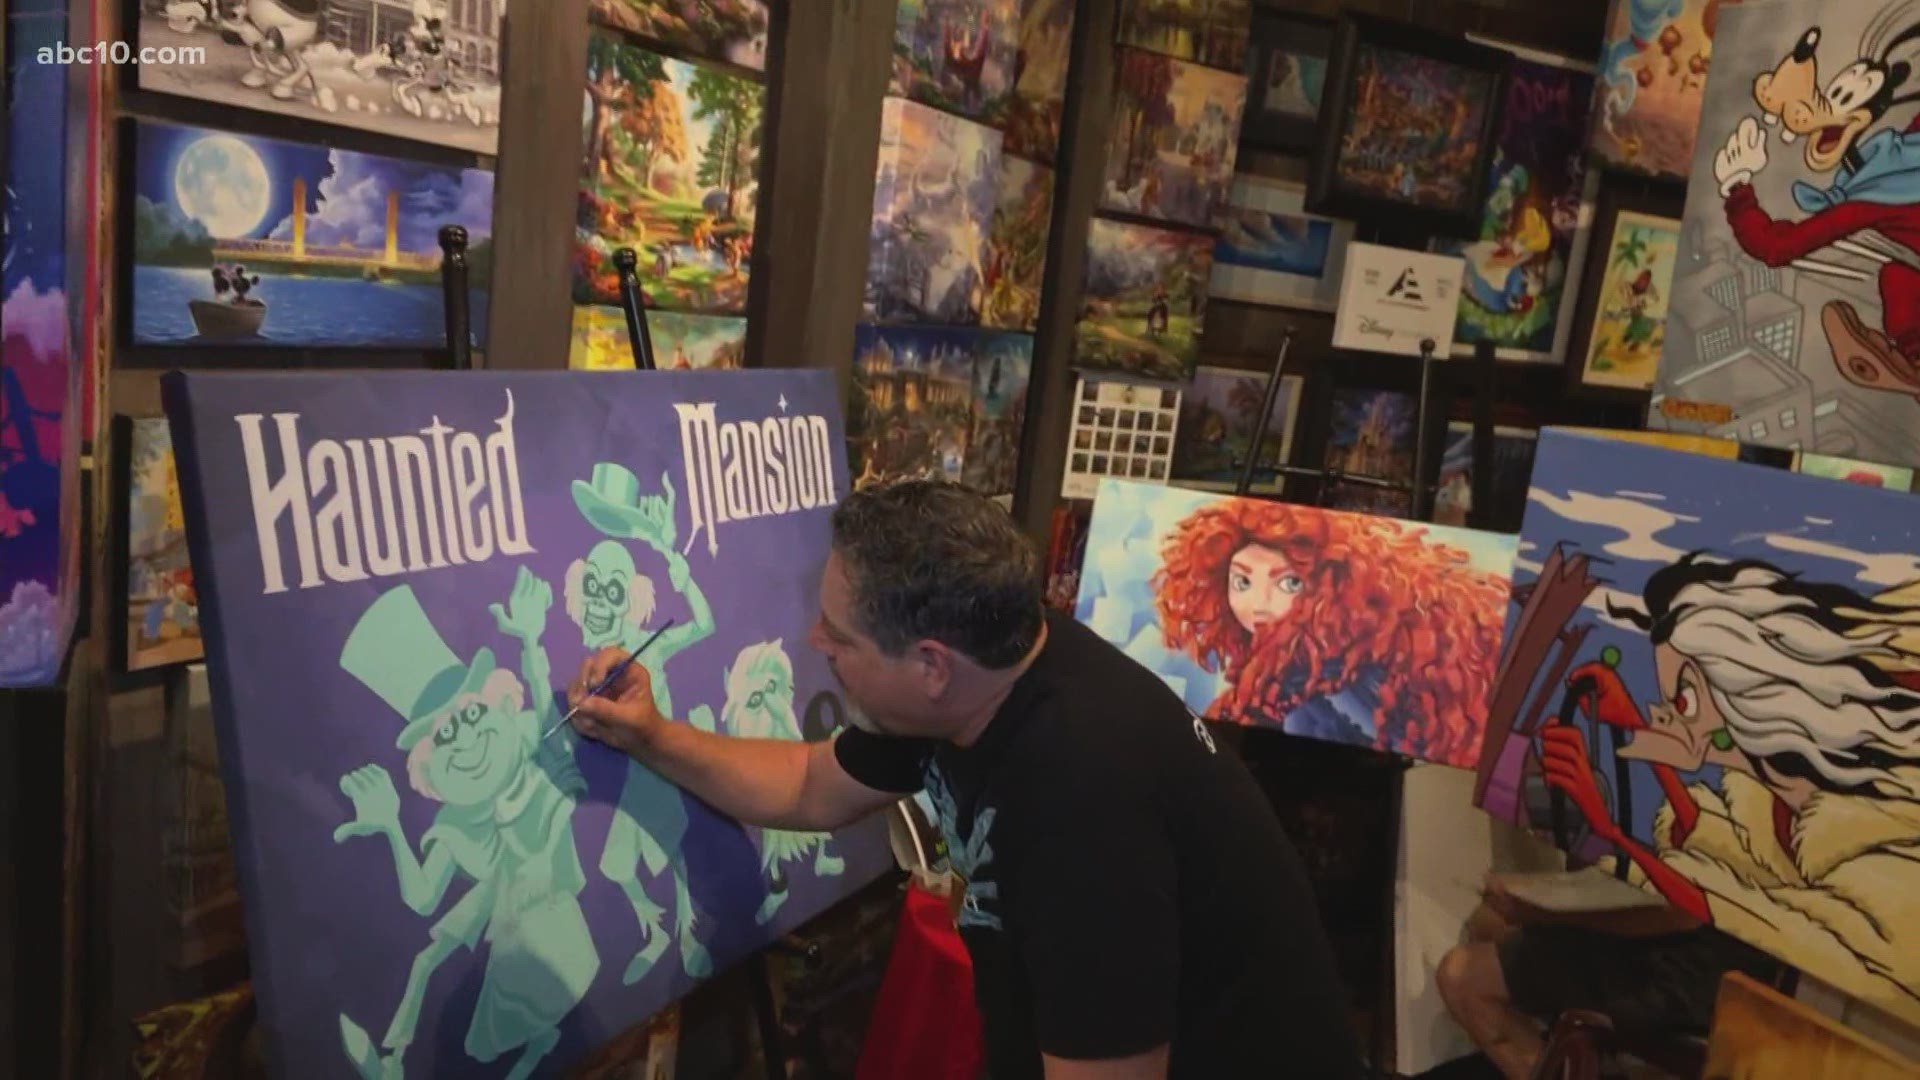 Celebrating their 30th anniversary, Stage Nine is hosting a Disney Art event.